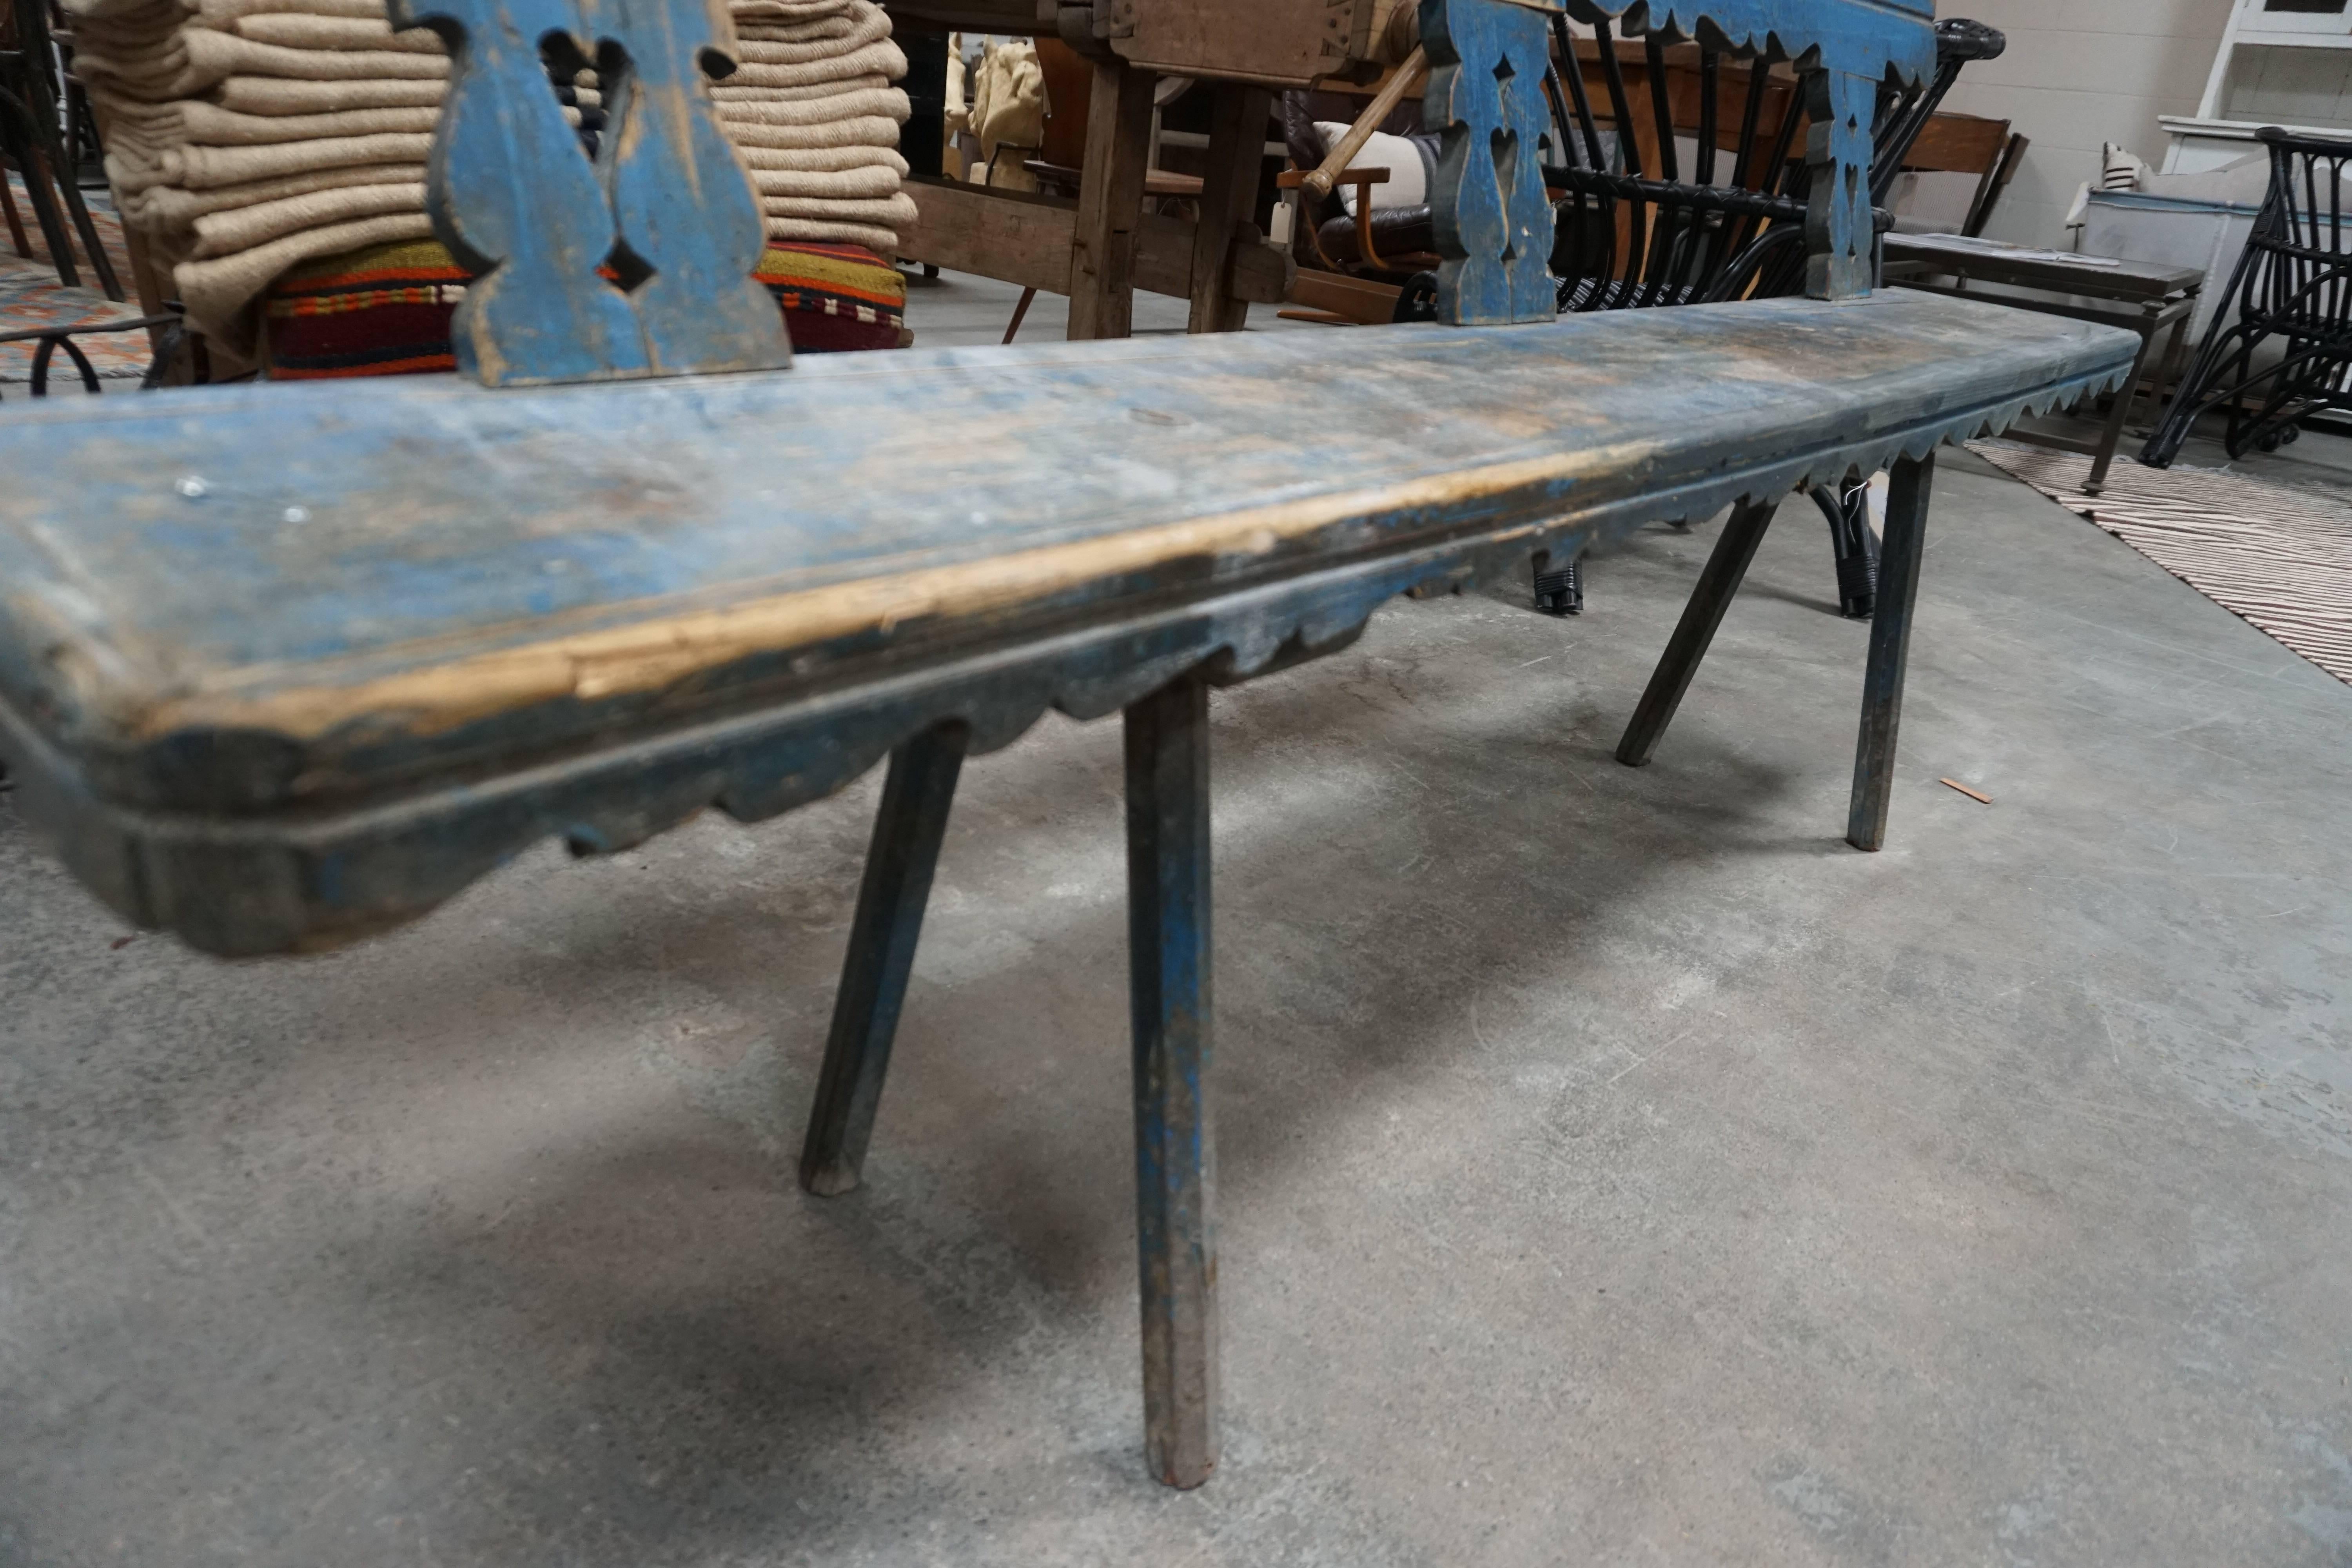 This French farmhouse bench dates from the early 1900s. The scalloped toprail and seat apron add charm to this rustic piece. Legs are hand-carved, and the entire piece is hand-painted a vibrant blue. 
Measure: Seat height 19.75